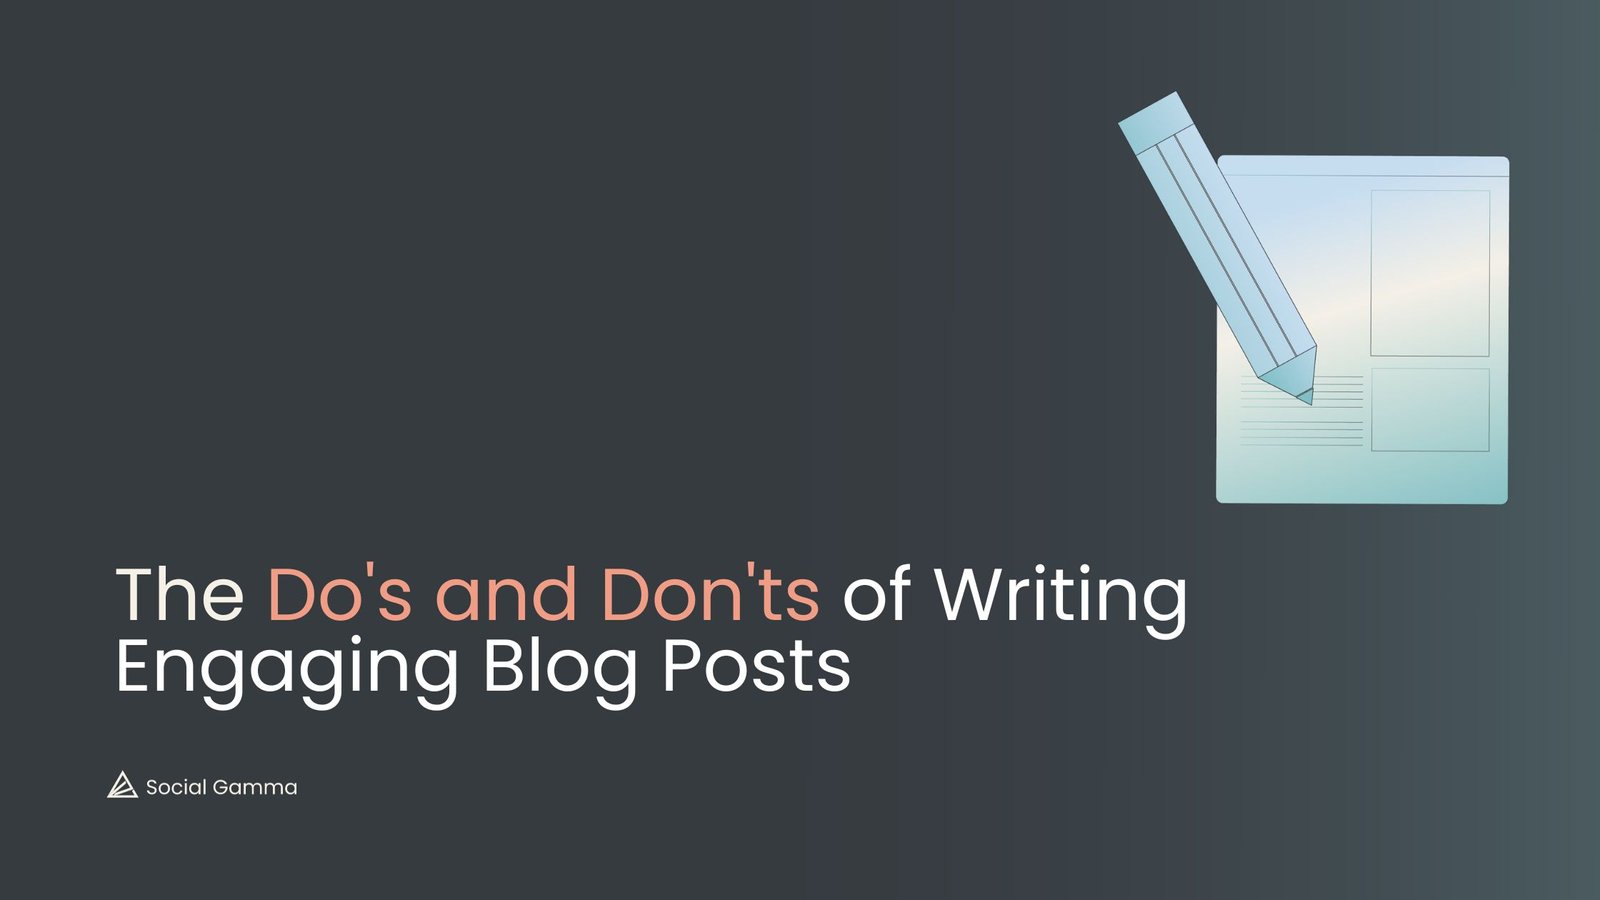 The Do's and Don'ts of Writing Engaging Blog Posts